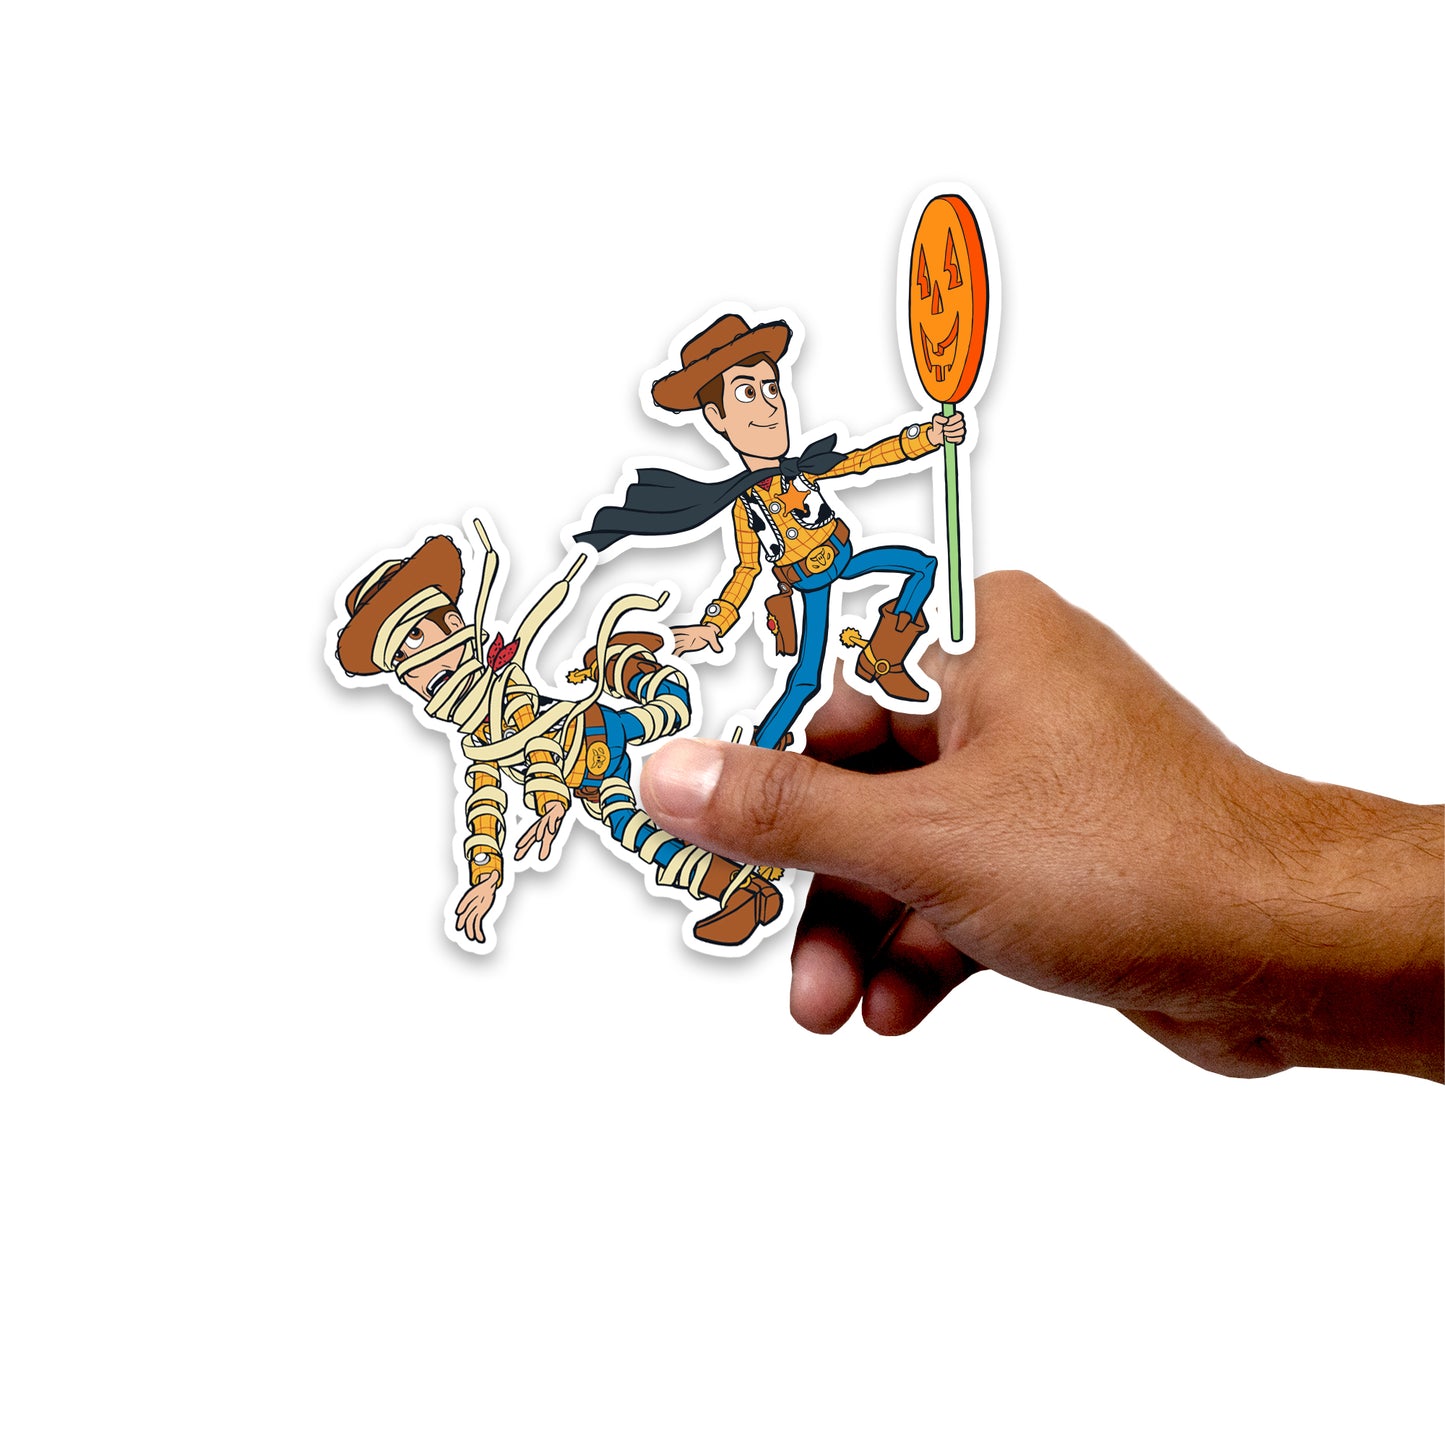 Sheet of 4 -Toy Story: Woody Minis        - Officially Licensed Disney Removable Wall   Adhesive Decal